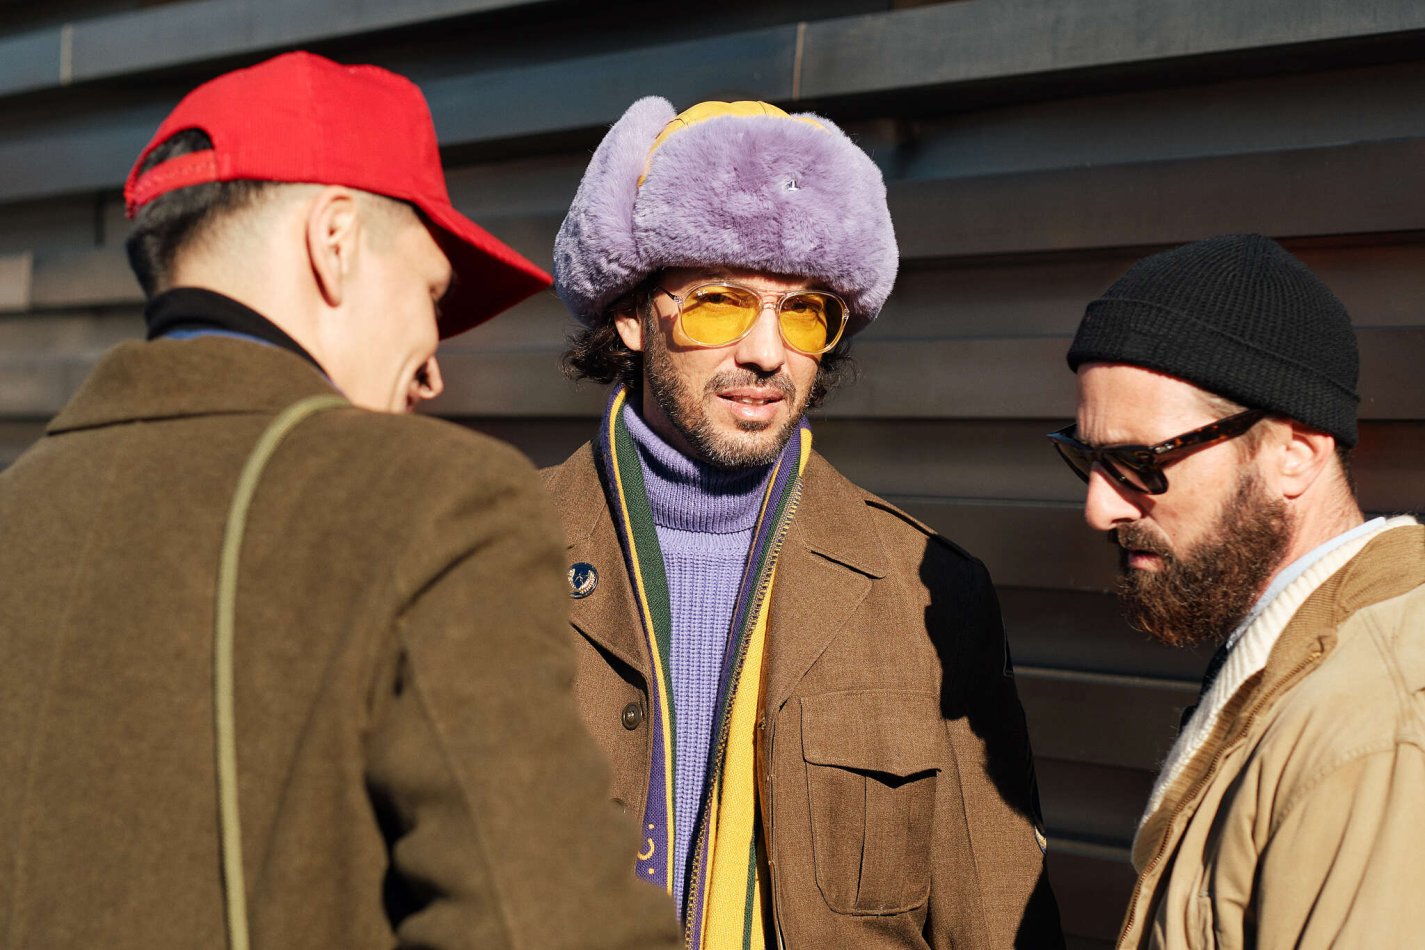 101 Pitti Immagine Uomo, the street photos from the event in Florence